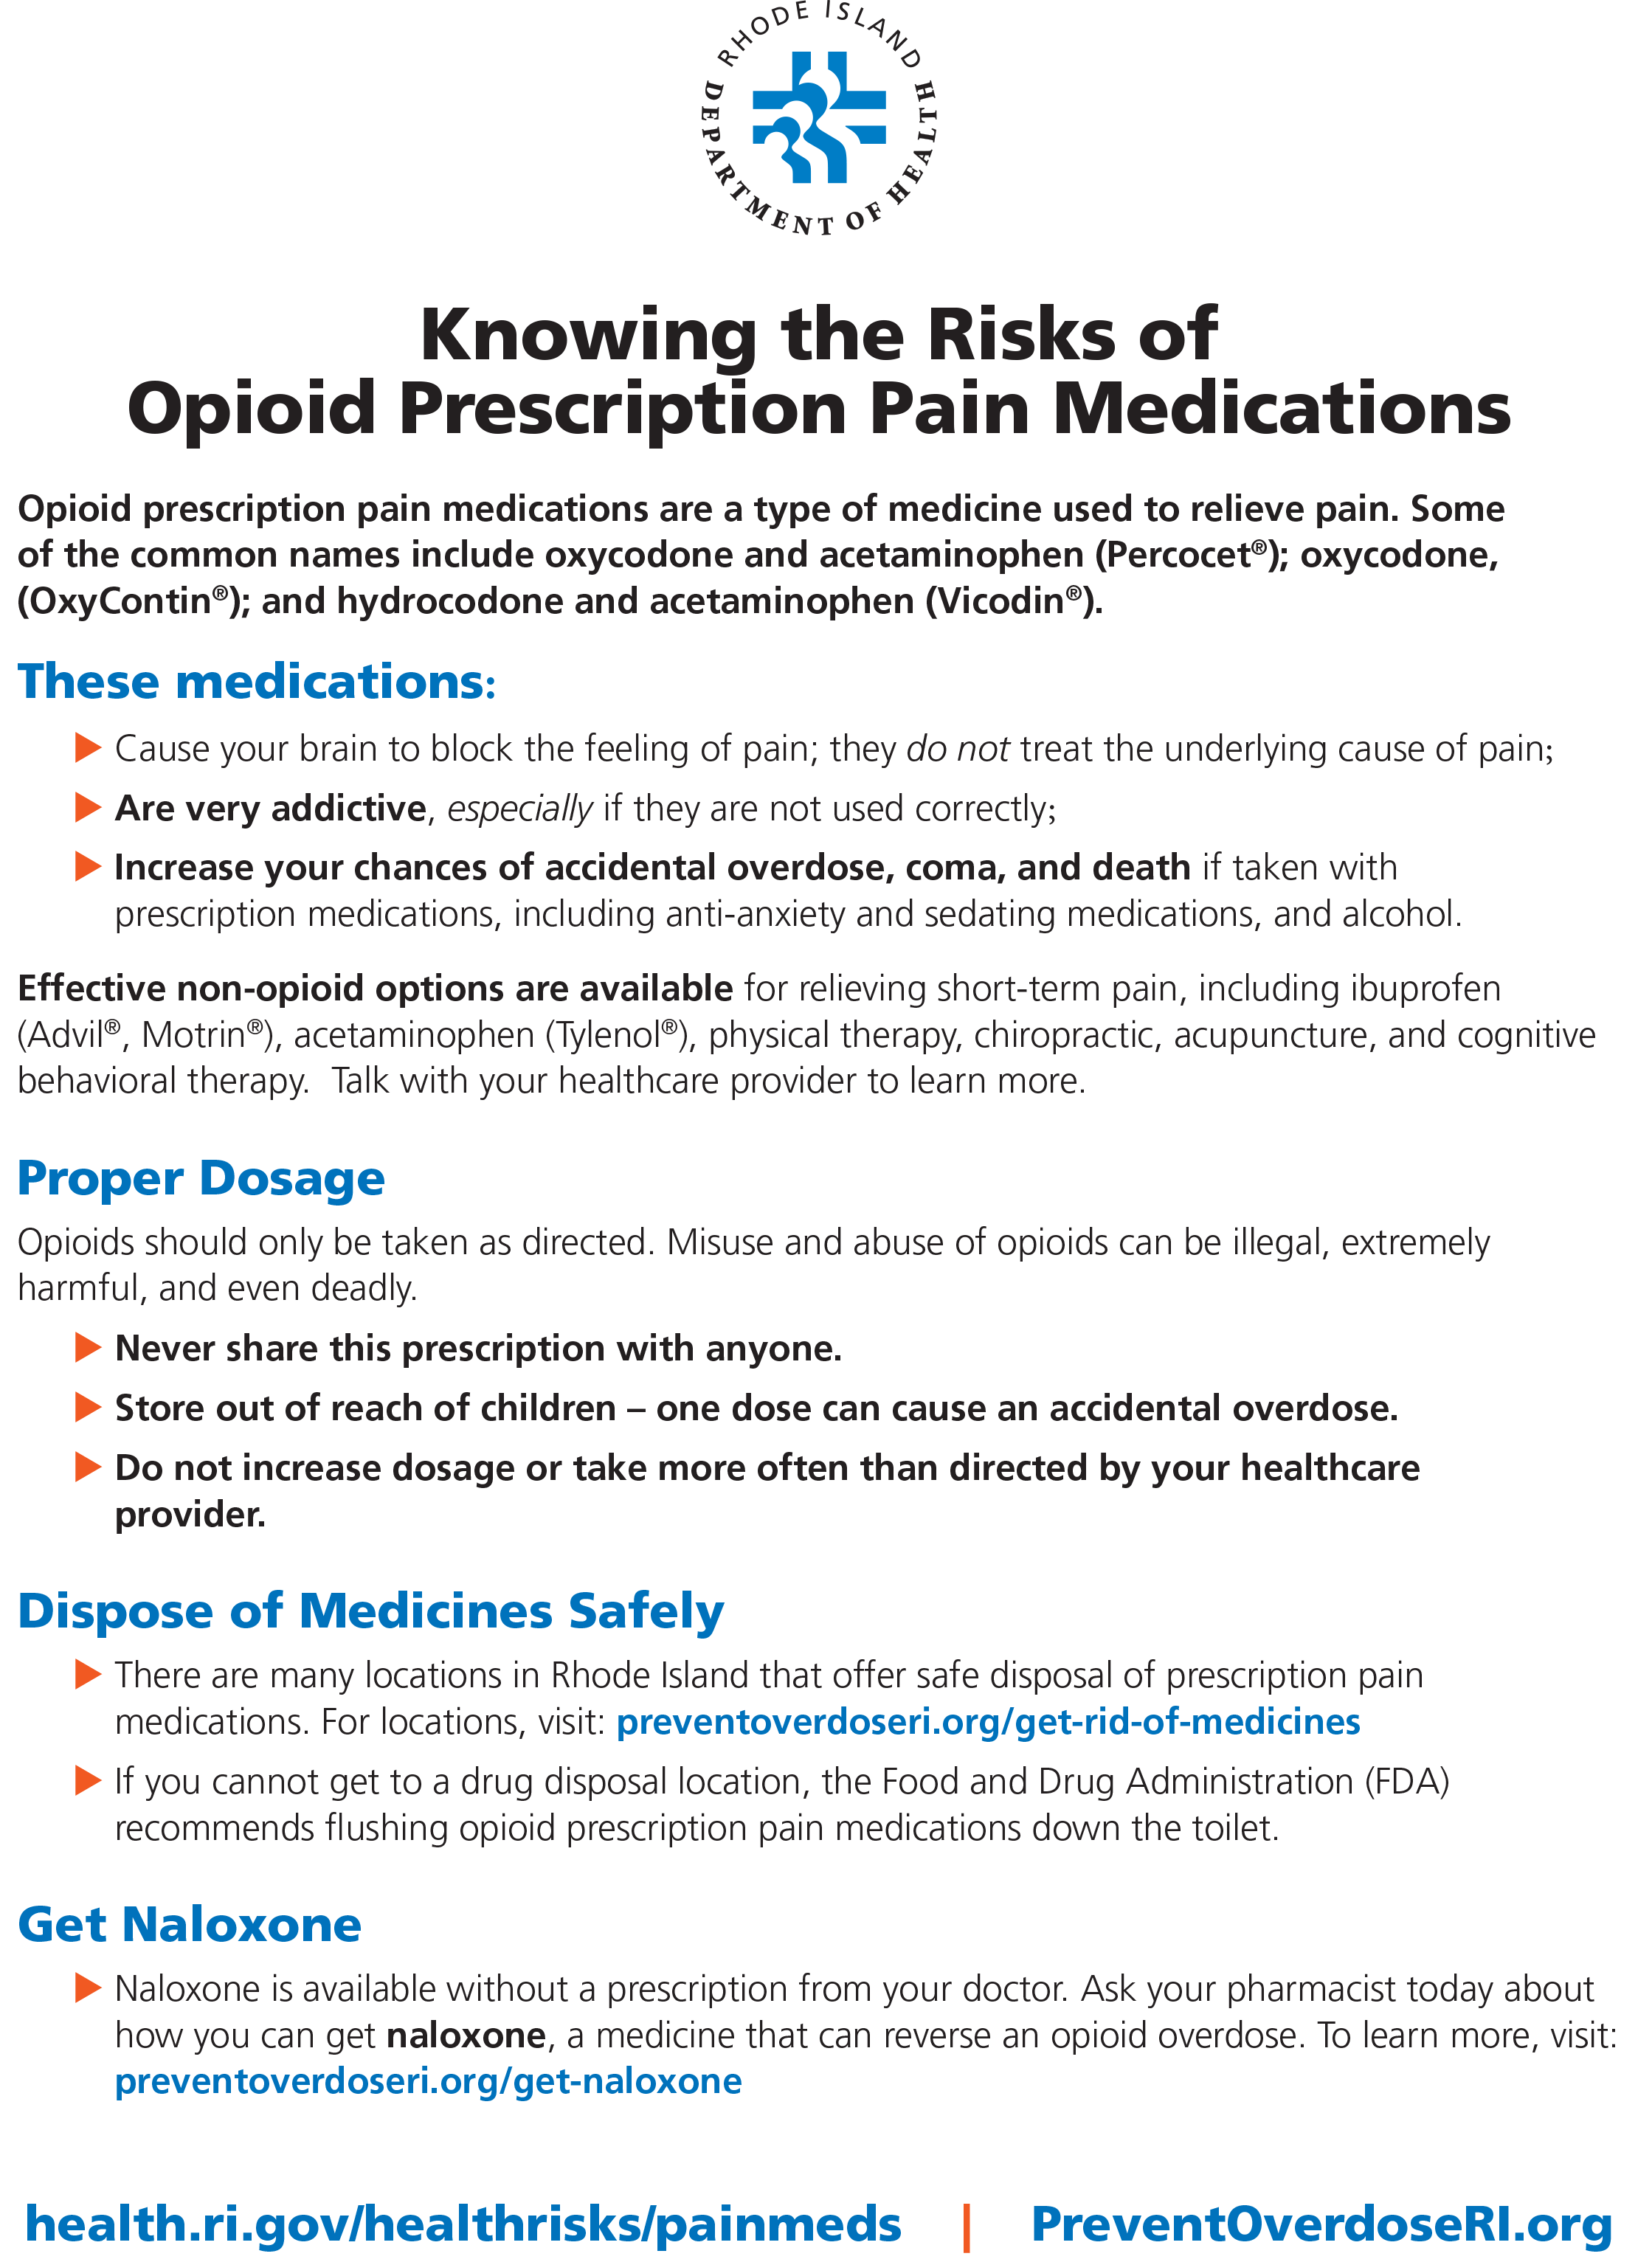 Knowing the Risks of Opioid Prescription Pain Medications 8 1/2 x 11 (English/Portuguese)